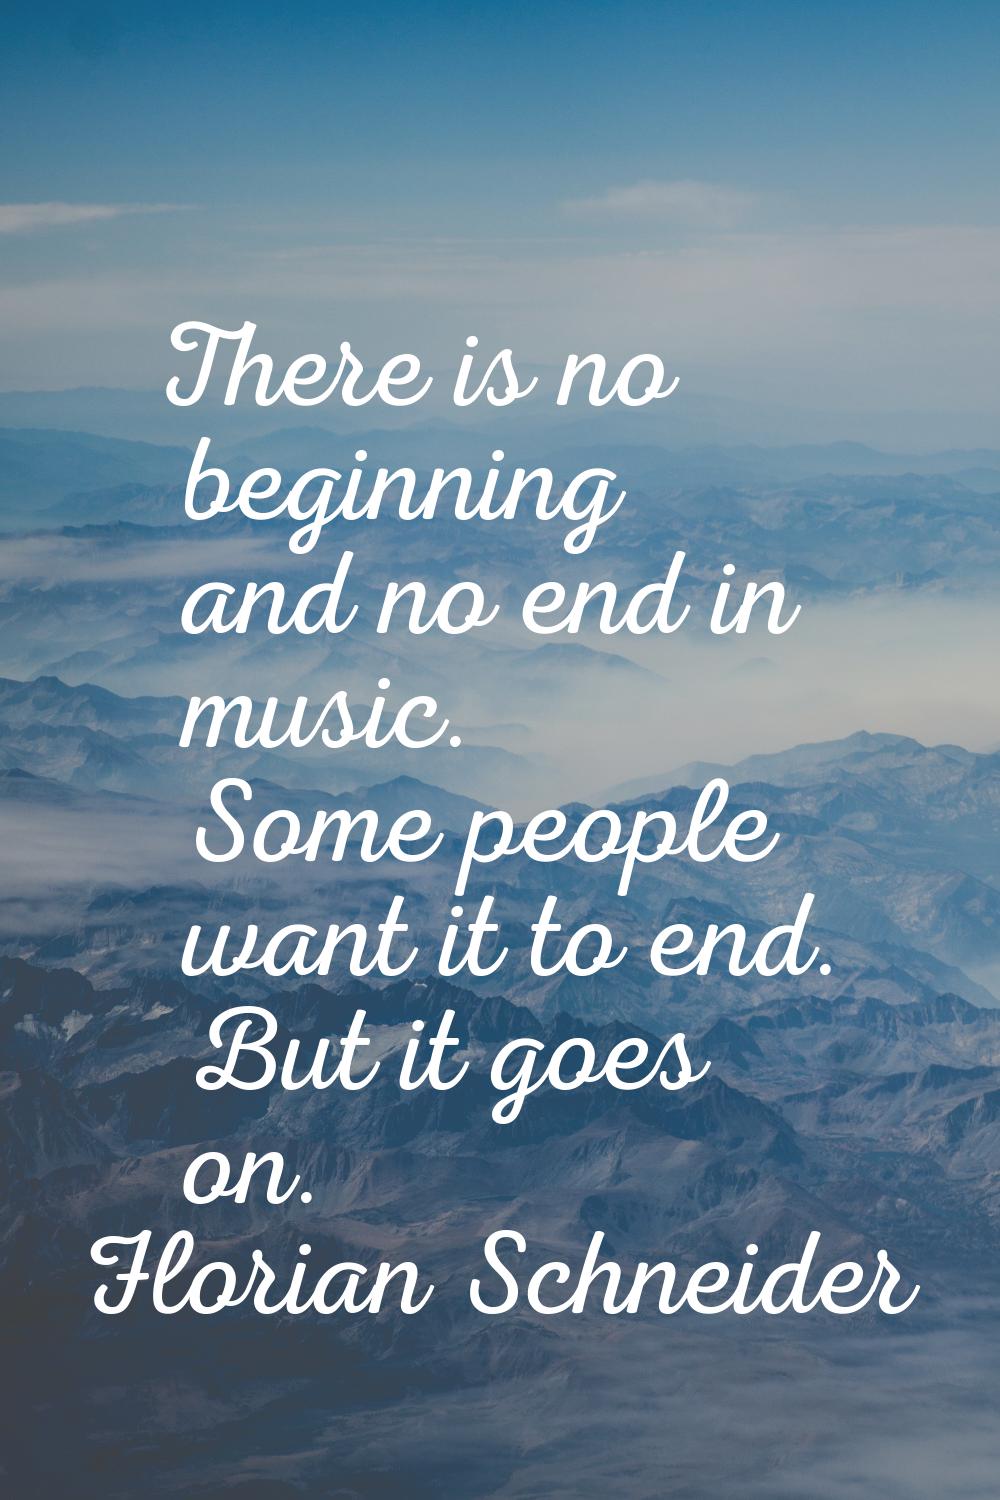 There is no beginning and no end in music. Some people want it to end. But it goes on.